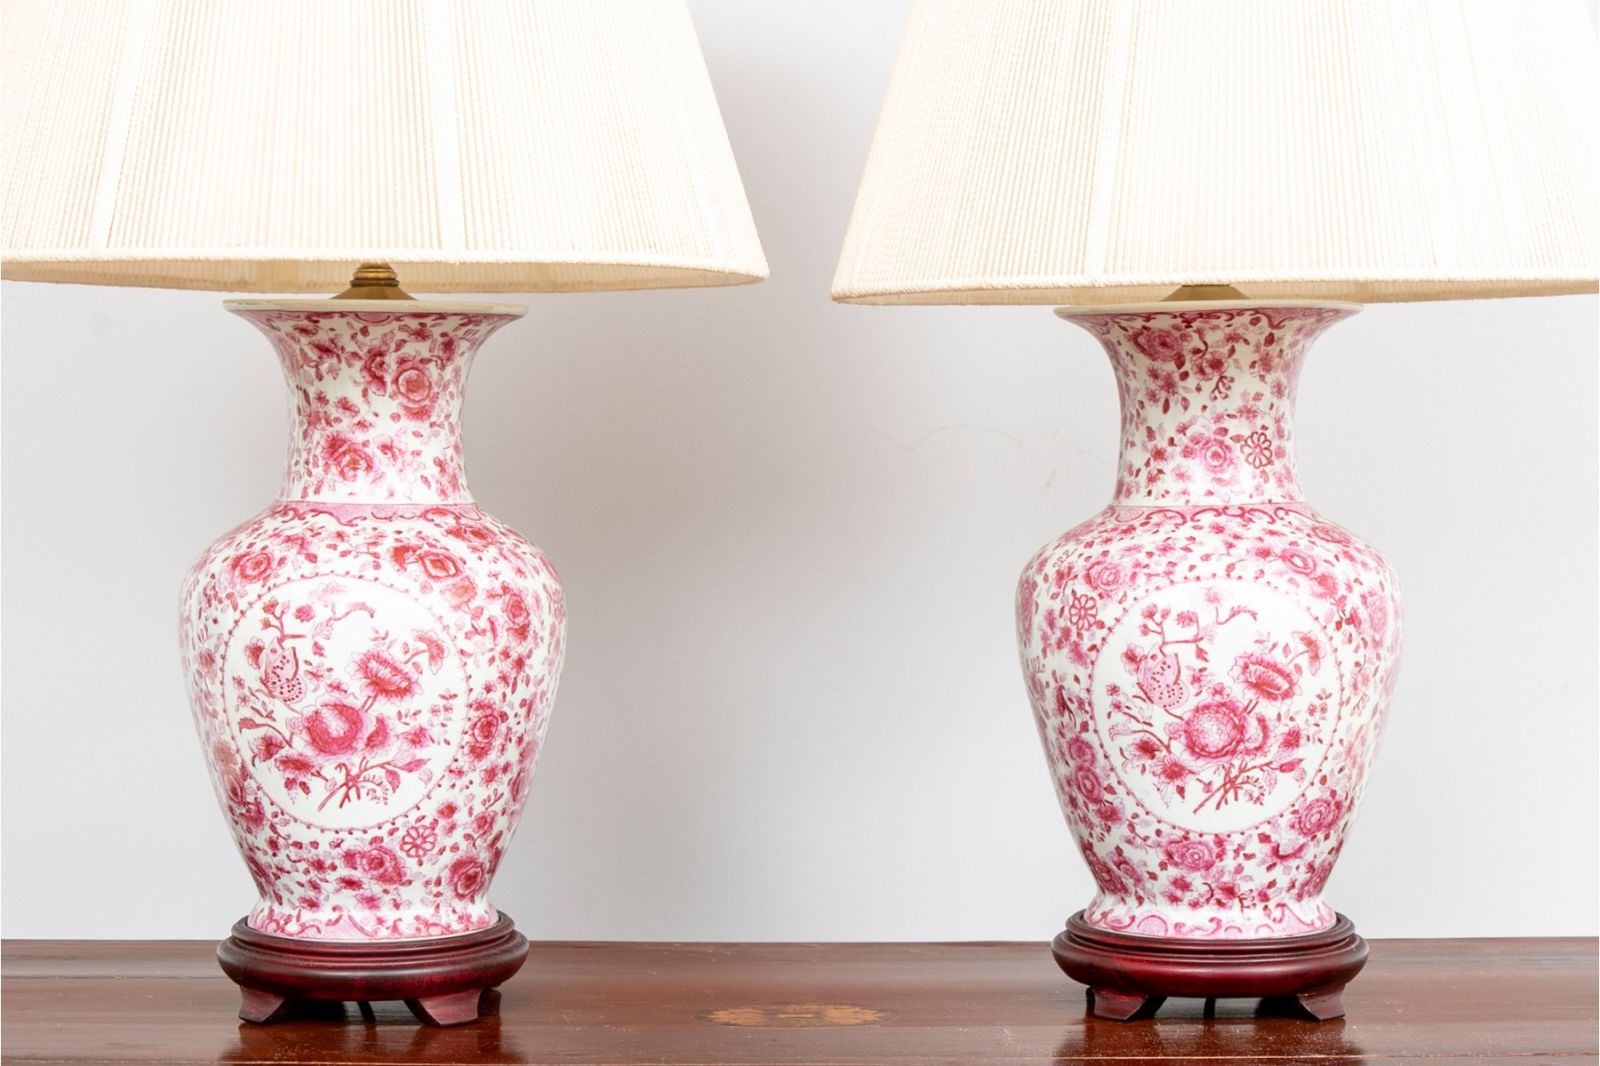 PAIR OF CHINESE EXPORT ENAMELLED PORCELAIN VASES MOUNTED AS TABLE LAMPS